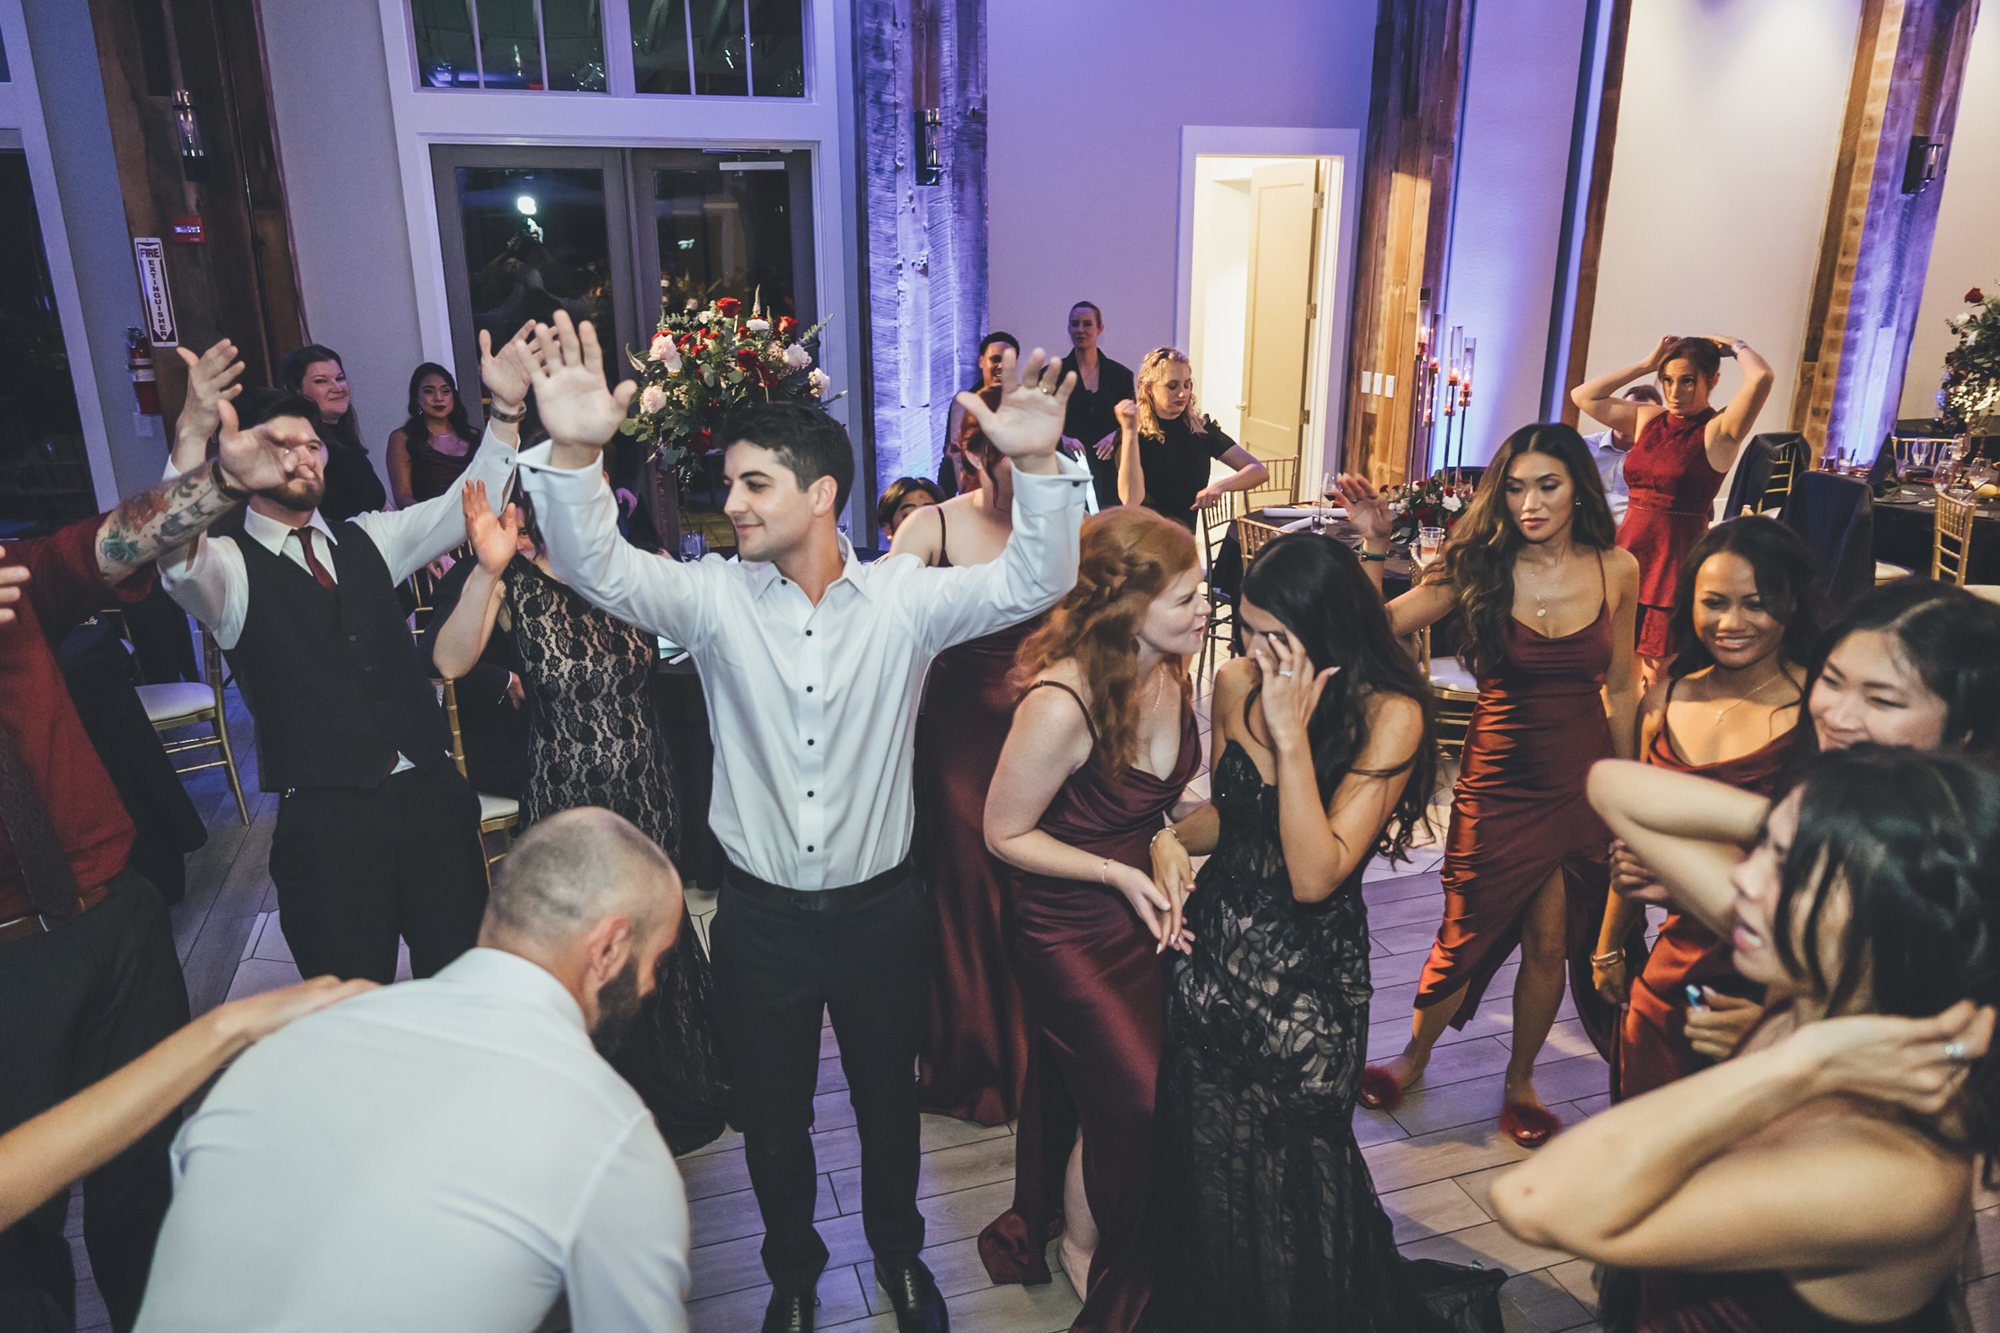 Bow Tie Photo & Video wedding reception dancing at St. Johns Golf & Country Club in St. Augustine, FL.jpg